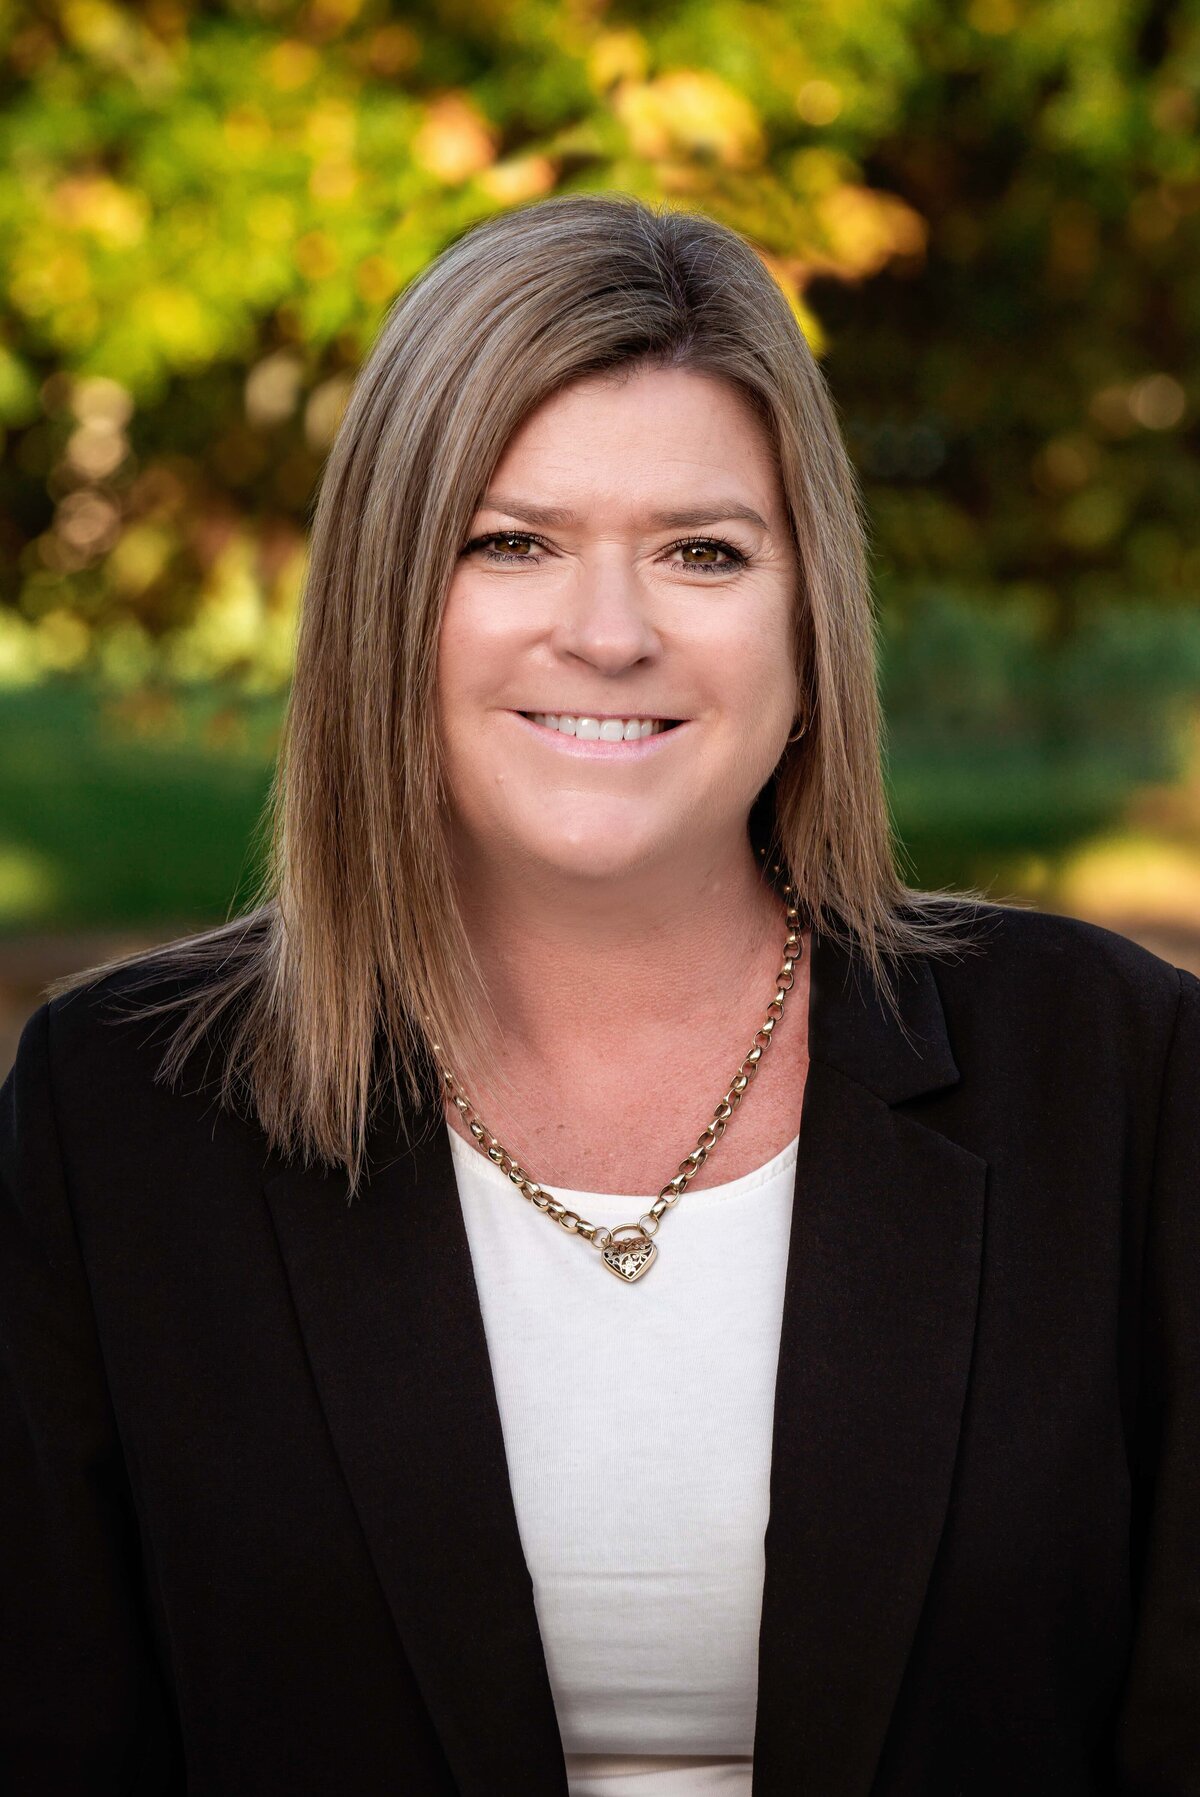 outdoor headshot of female real estate agent